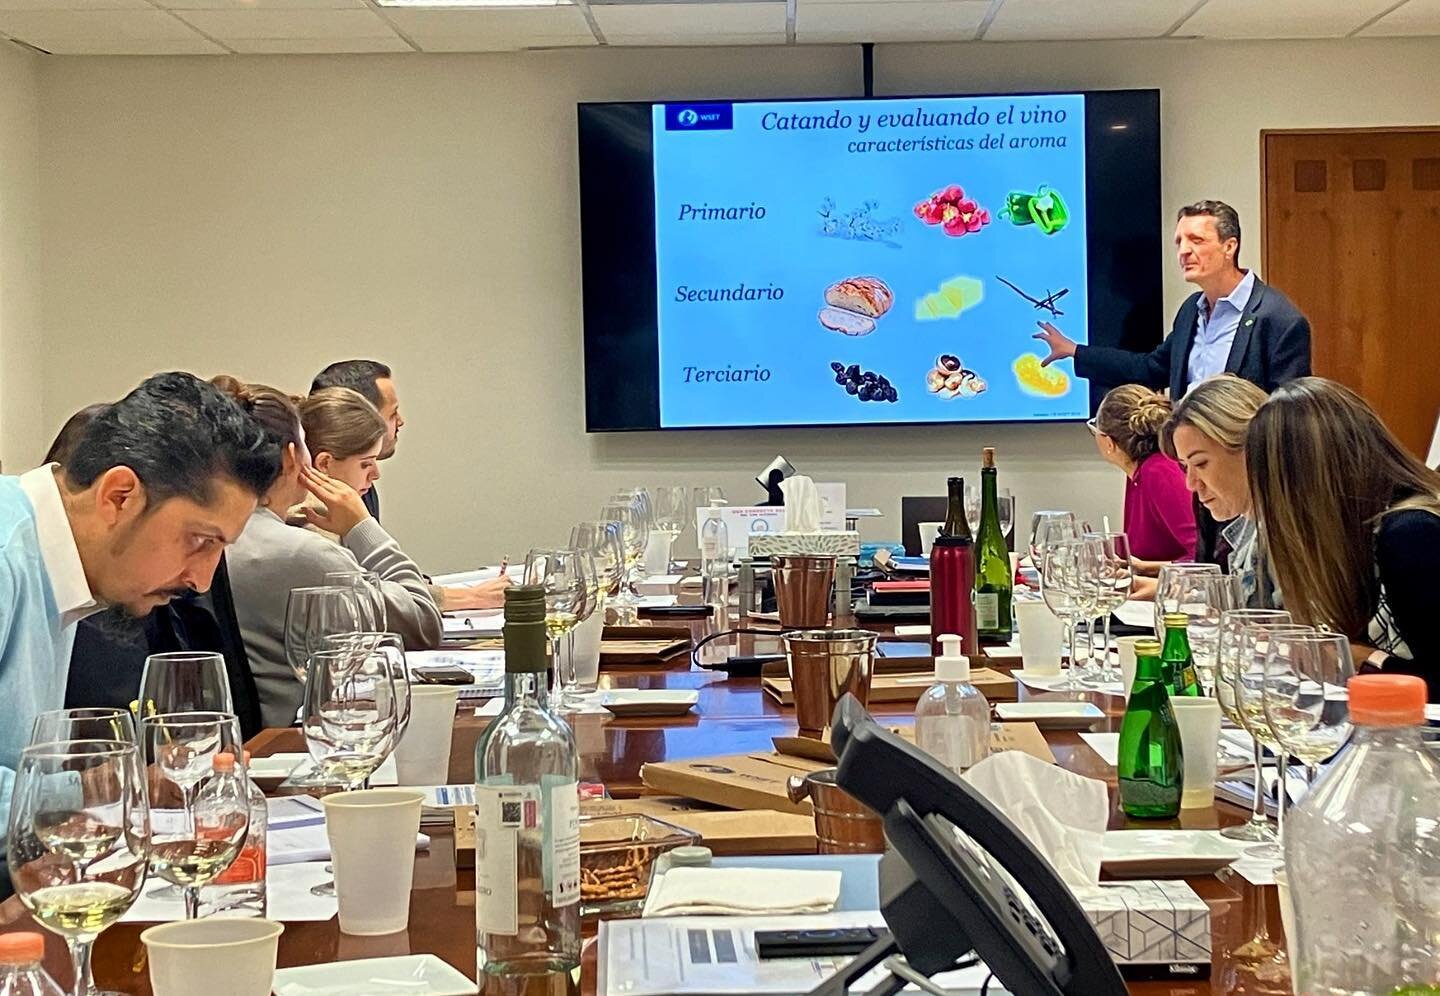 Sneak peak of our last WSET L2 course 🍷

📚 Uncorking success at our classroom! 
Cheers to knowledge, friends, and fine wine! 🥂🍇 
.
.
.
#WSETLevel2 #WineEducation #winelover #sommlife #vinovallarta